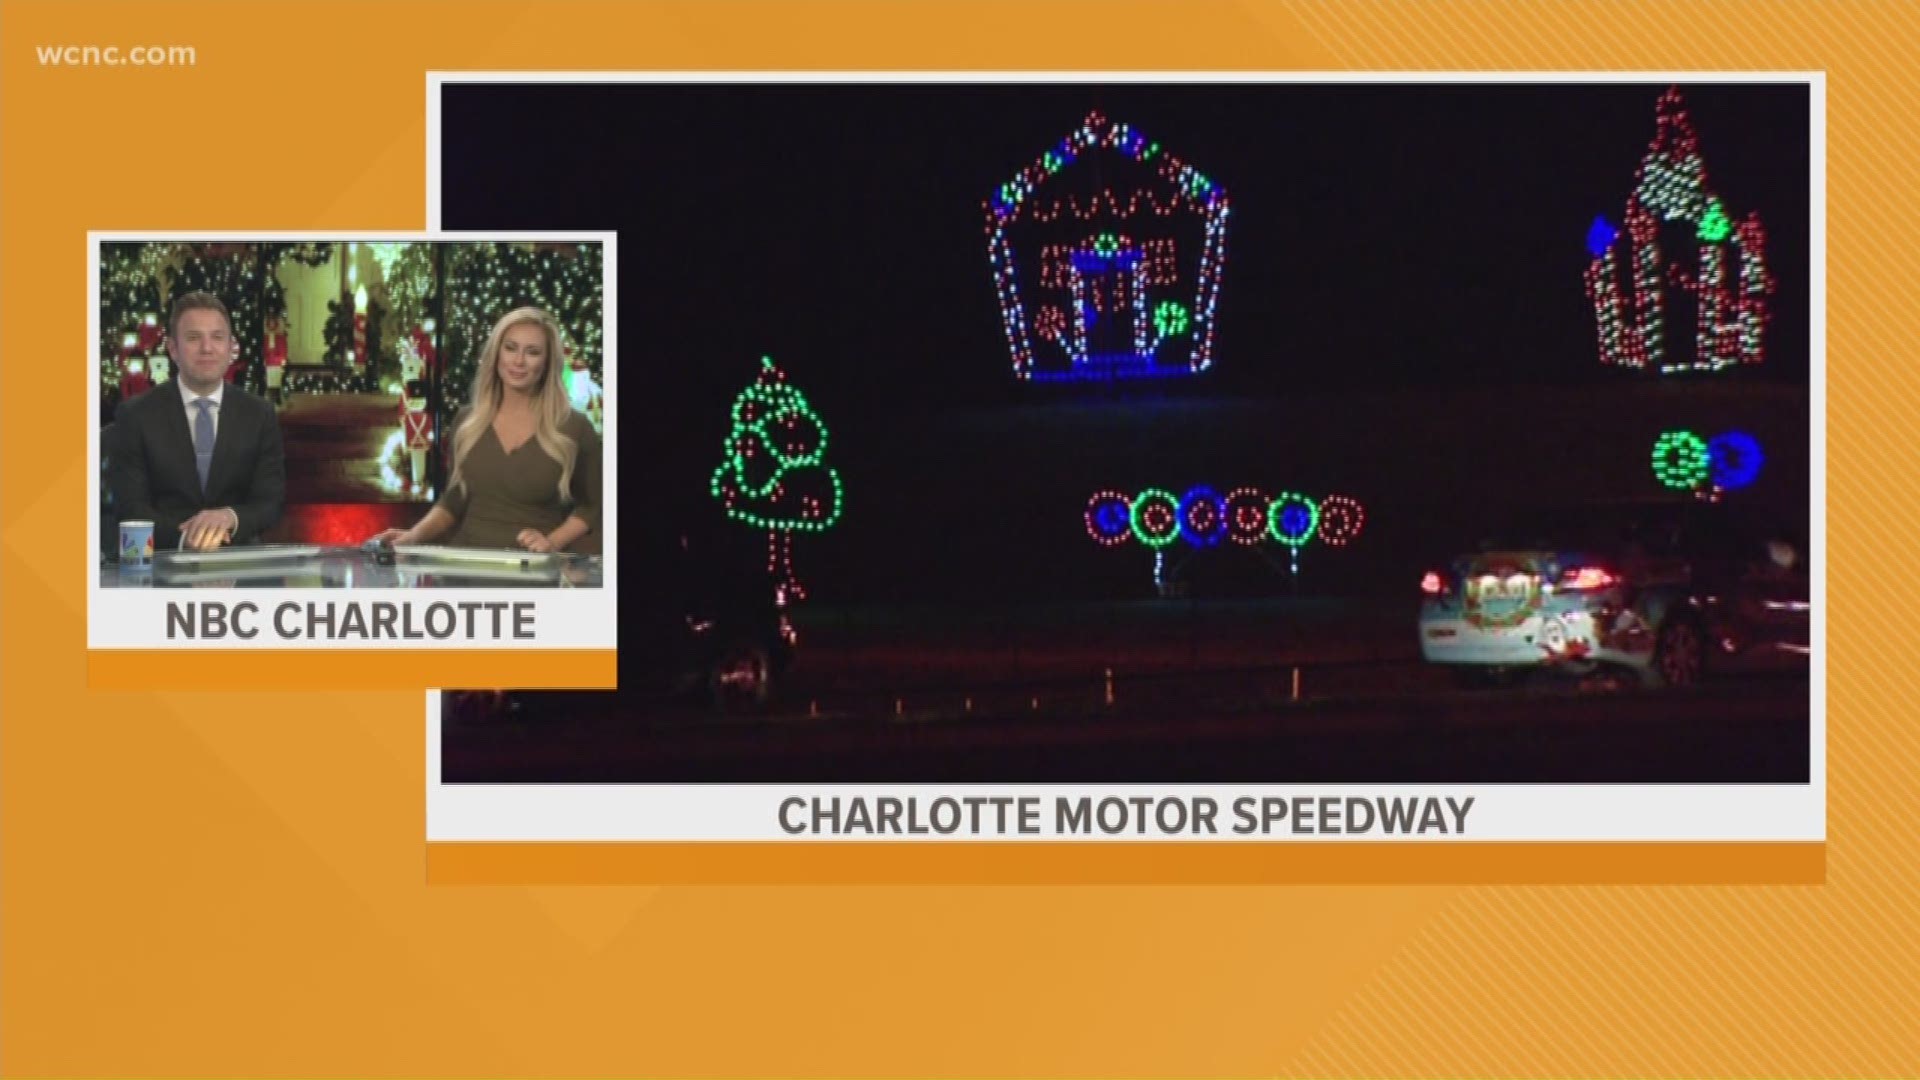 If you're feeling the holiday spirit, take your mood to the next level by visiting Charlotte Motor Speedway's Christmas Village and enjoying more than 3.5 million lights!